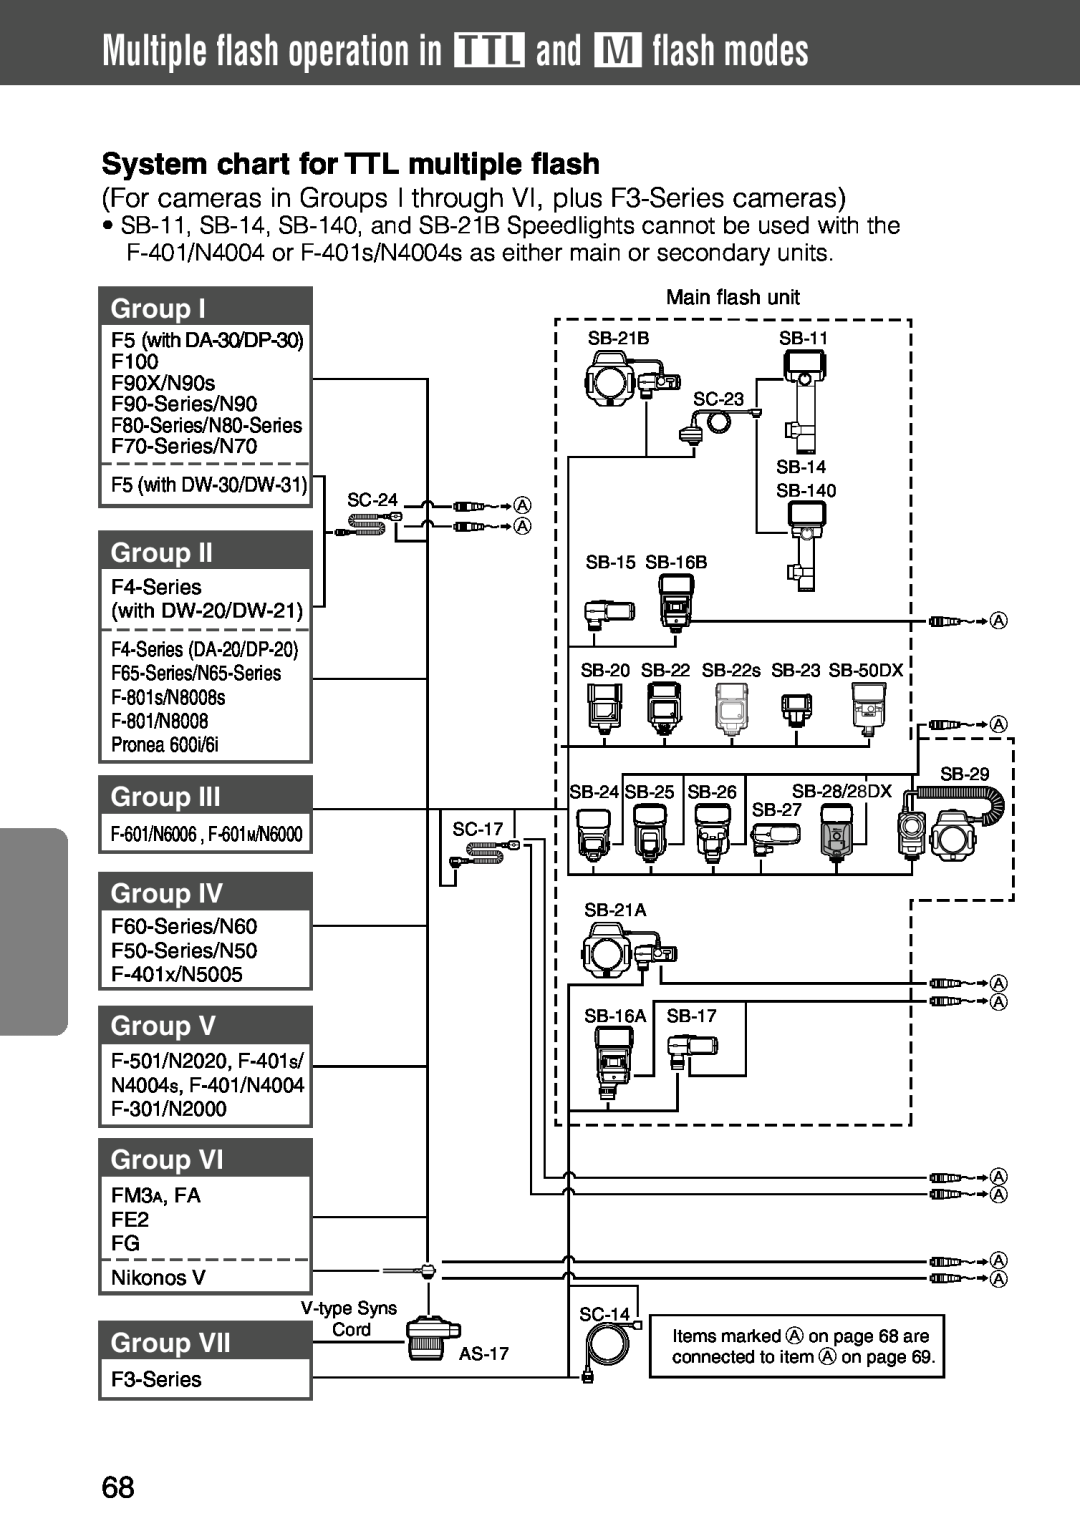 Nikon SB-28 instruction manual Multiple flash operation in t and ƒ flash modes, System chart for TTL multiple flash, Group 